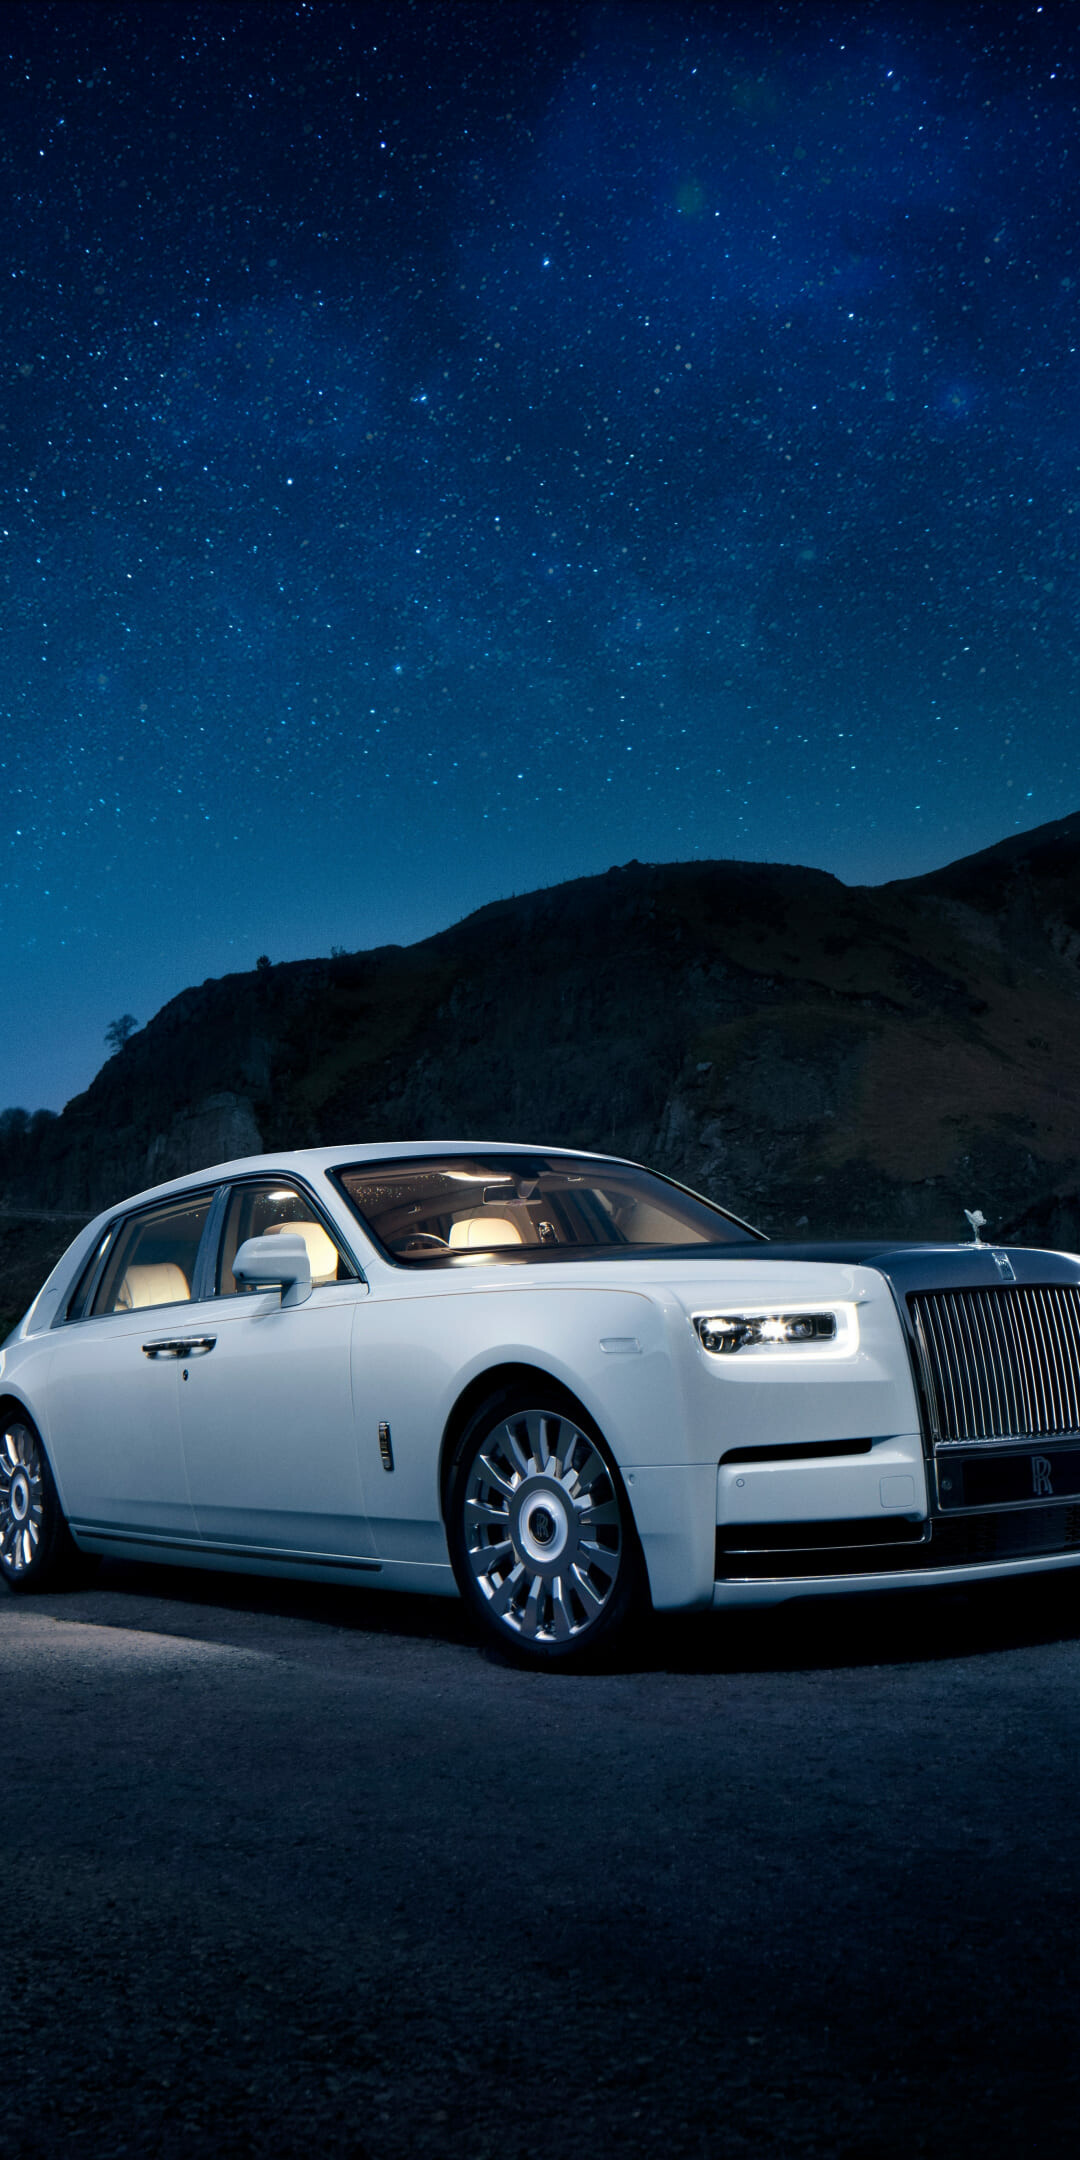 Rolls-Royce: The company was formed on 15 March 1906, Ghost. 1080x2160 HD Wallpaper.